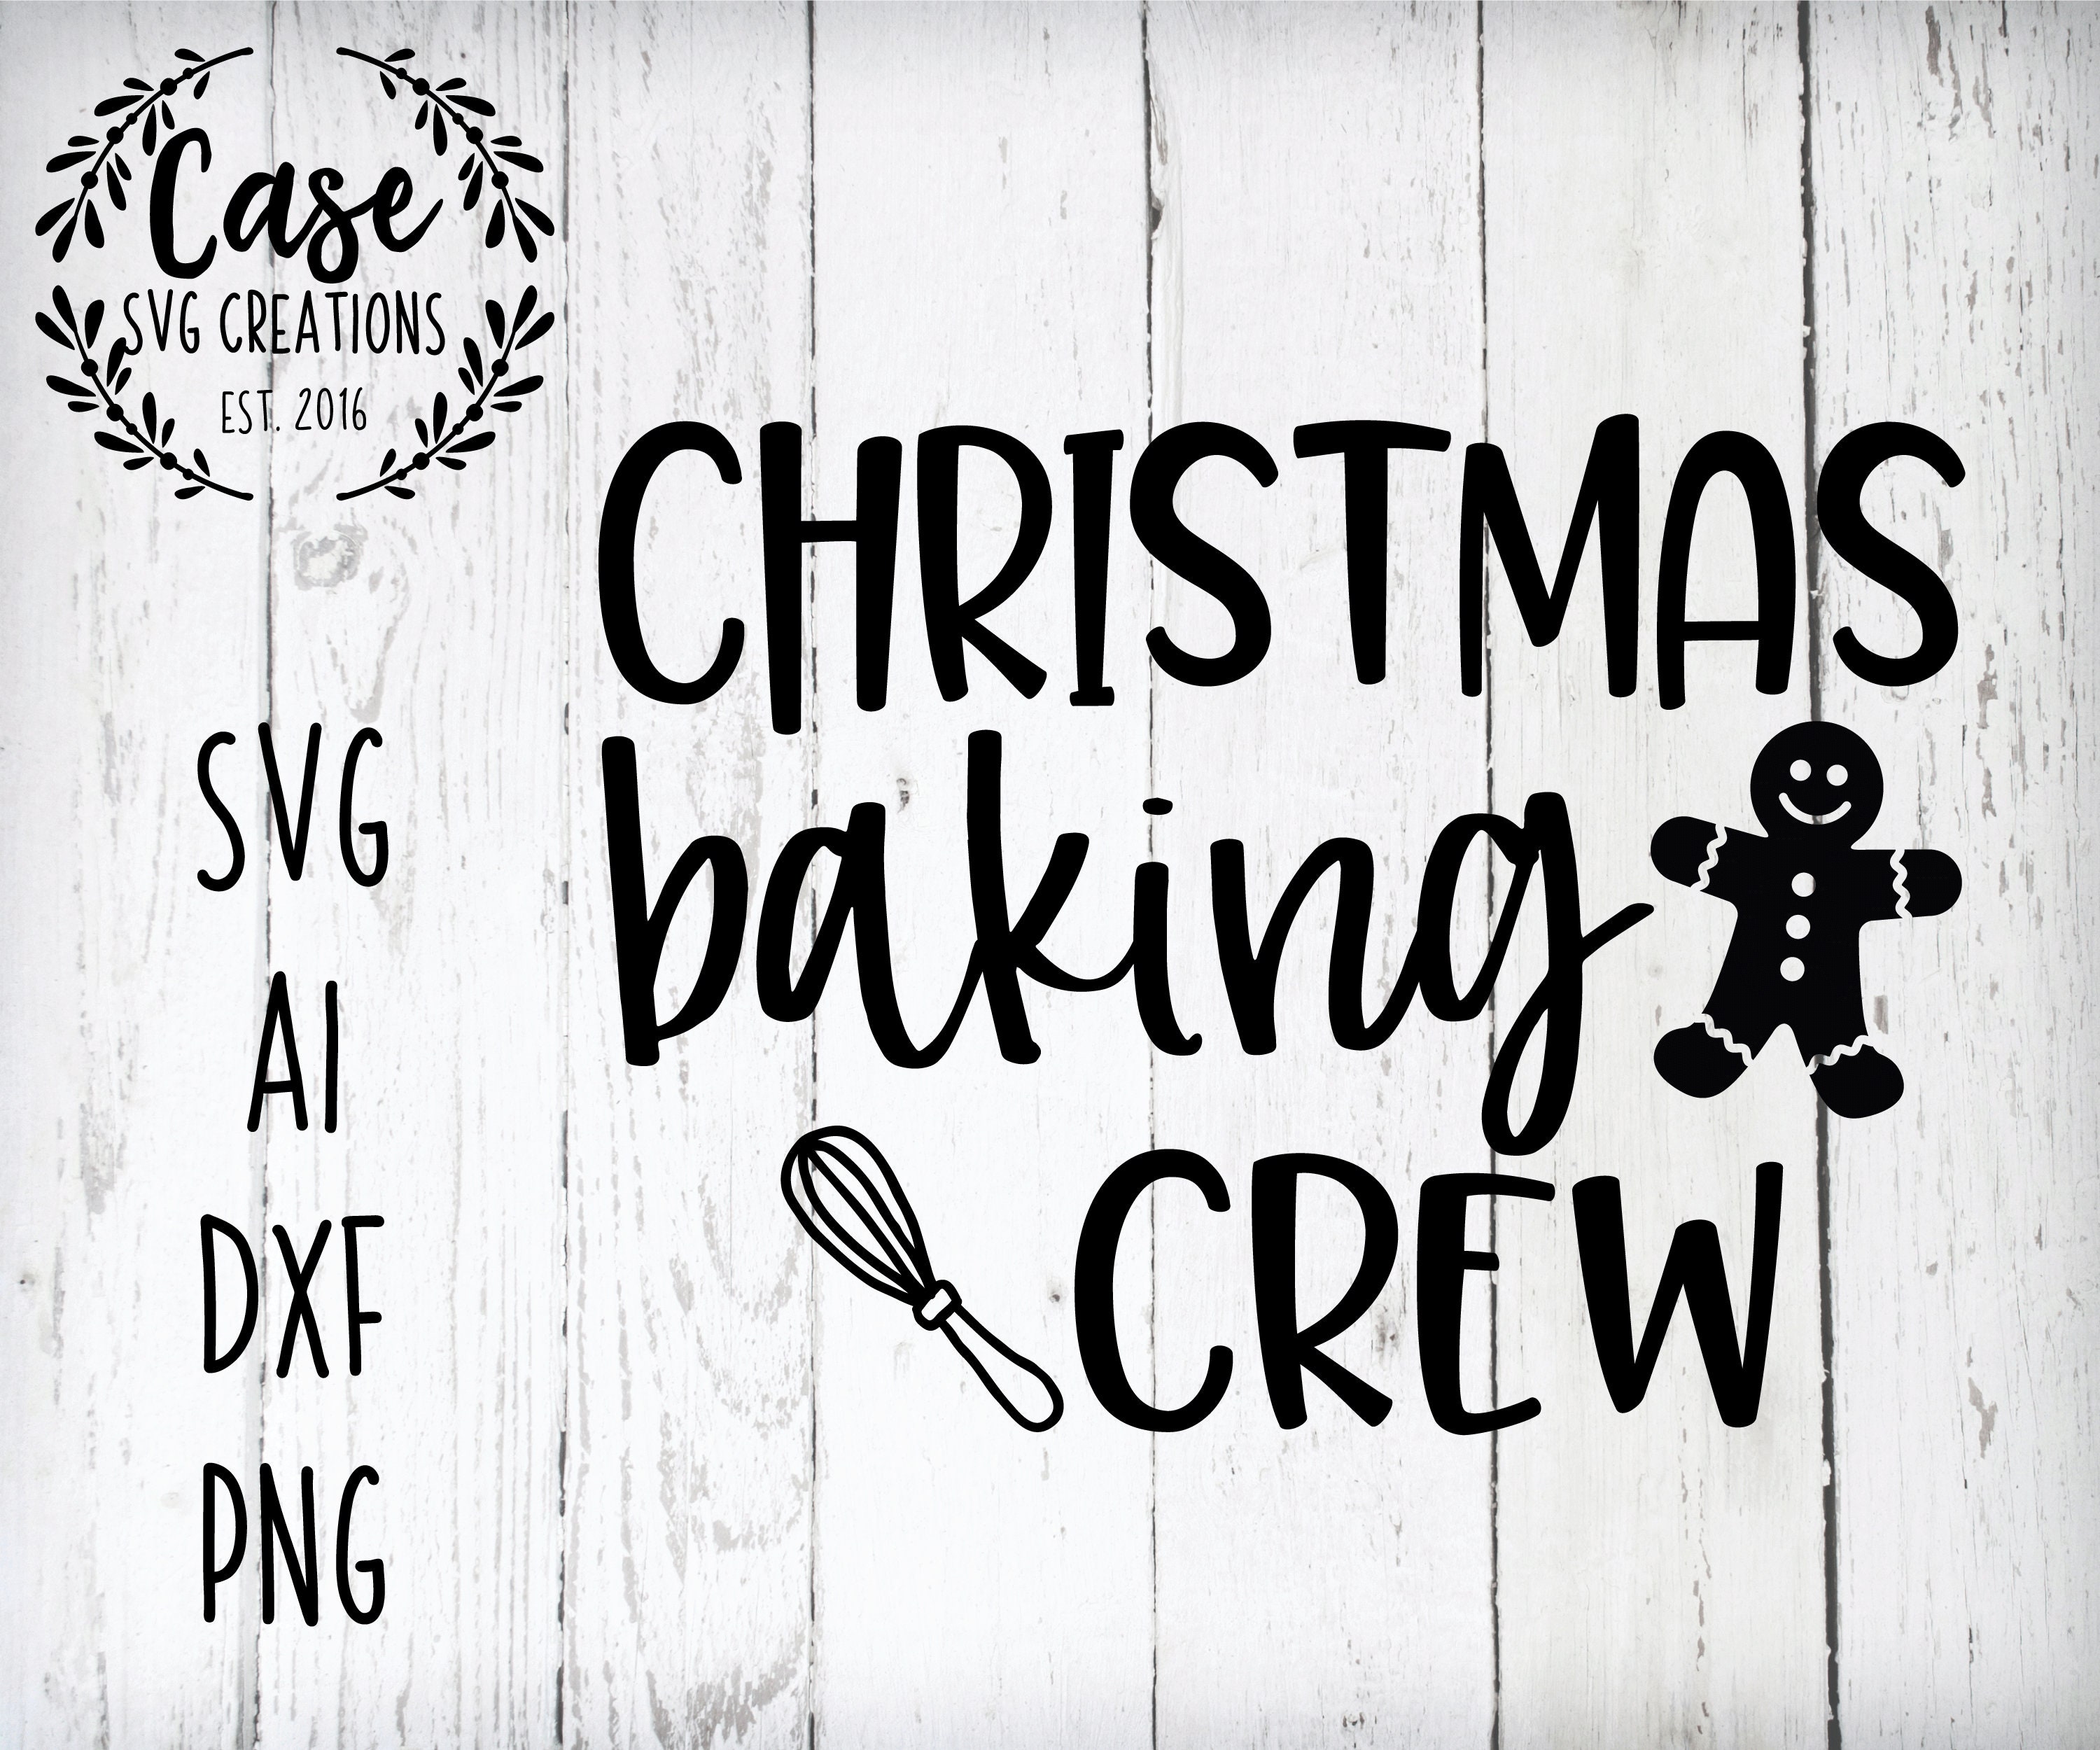 Download Christmas Baking Crew SVG Cutting FIle, Ai, Dxf and ...